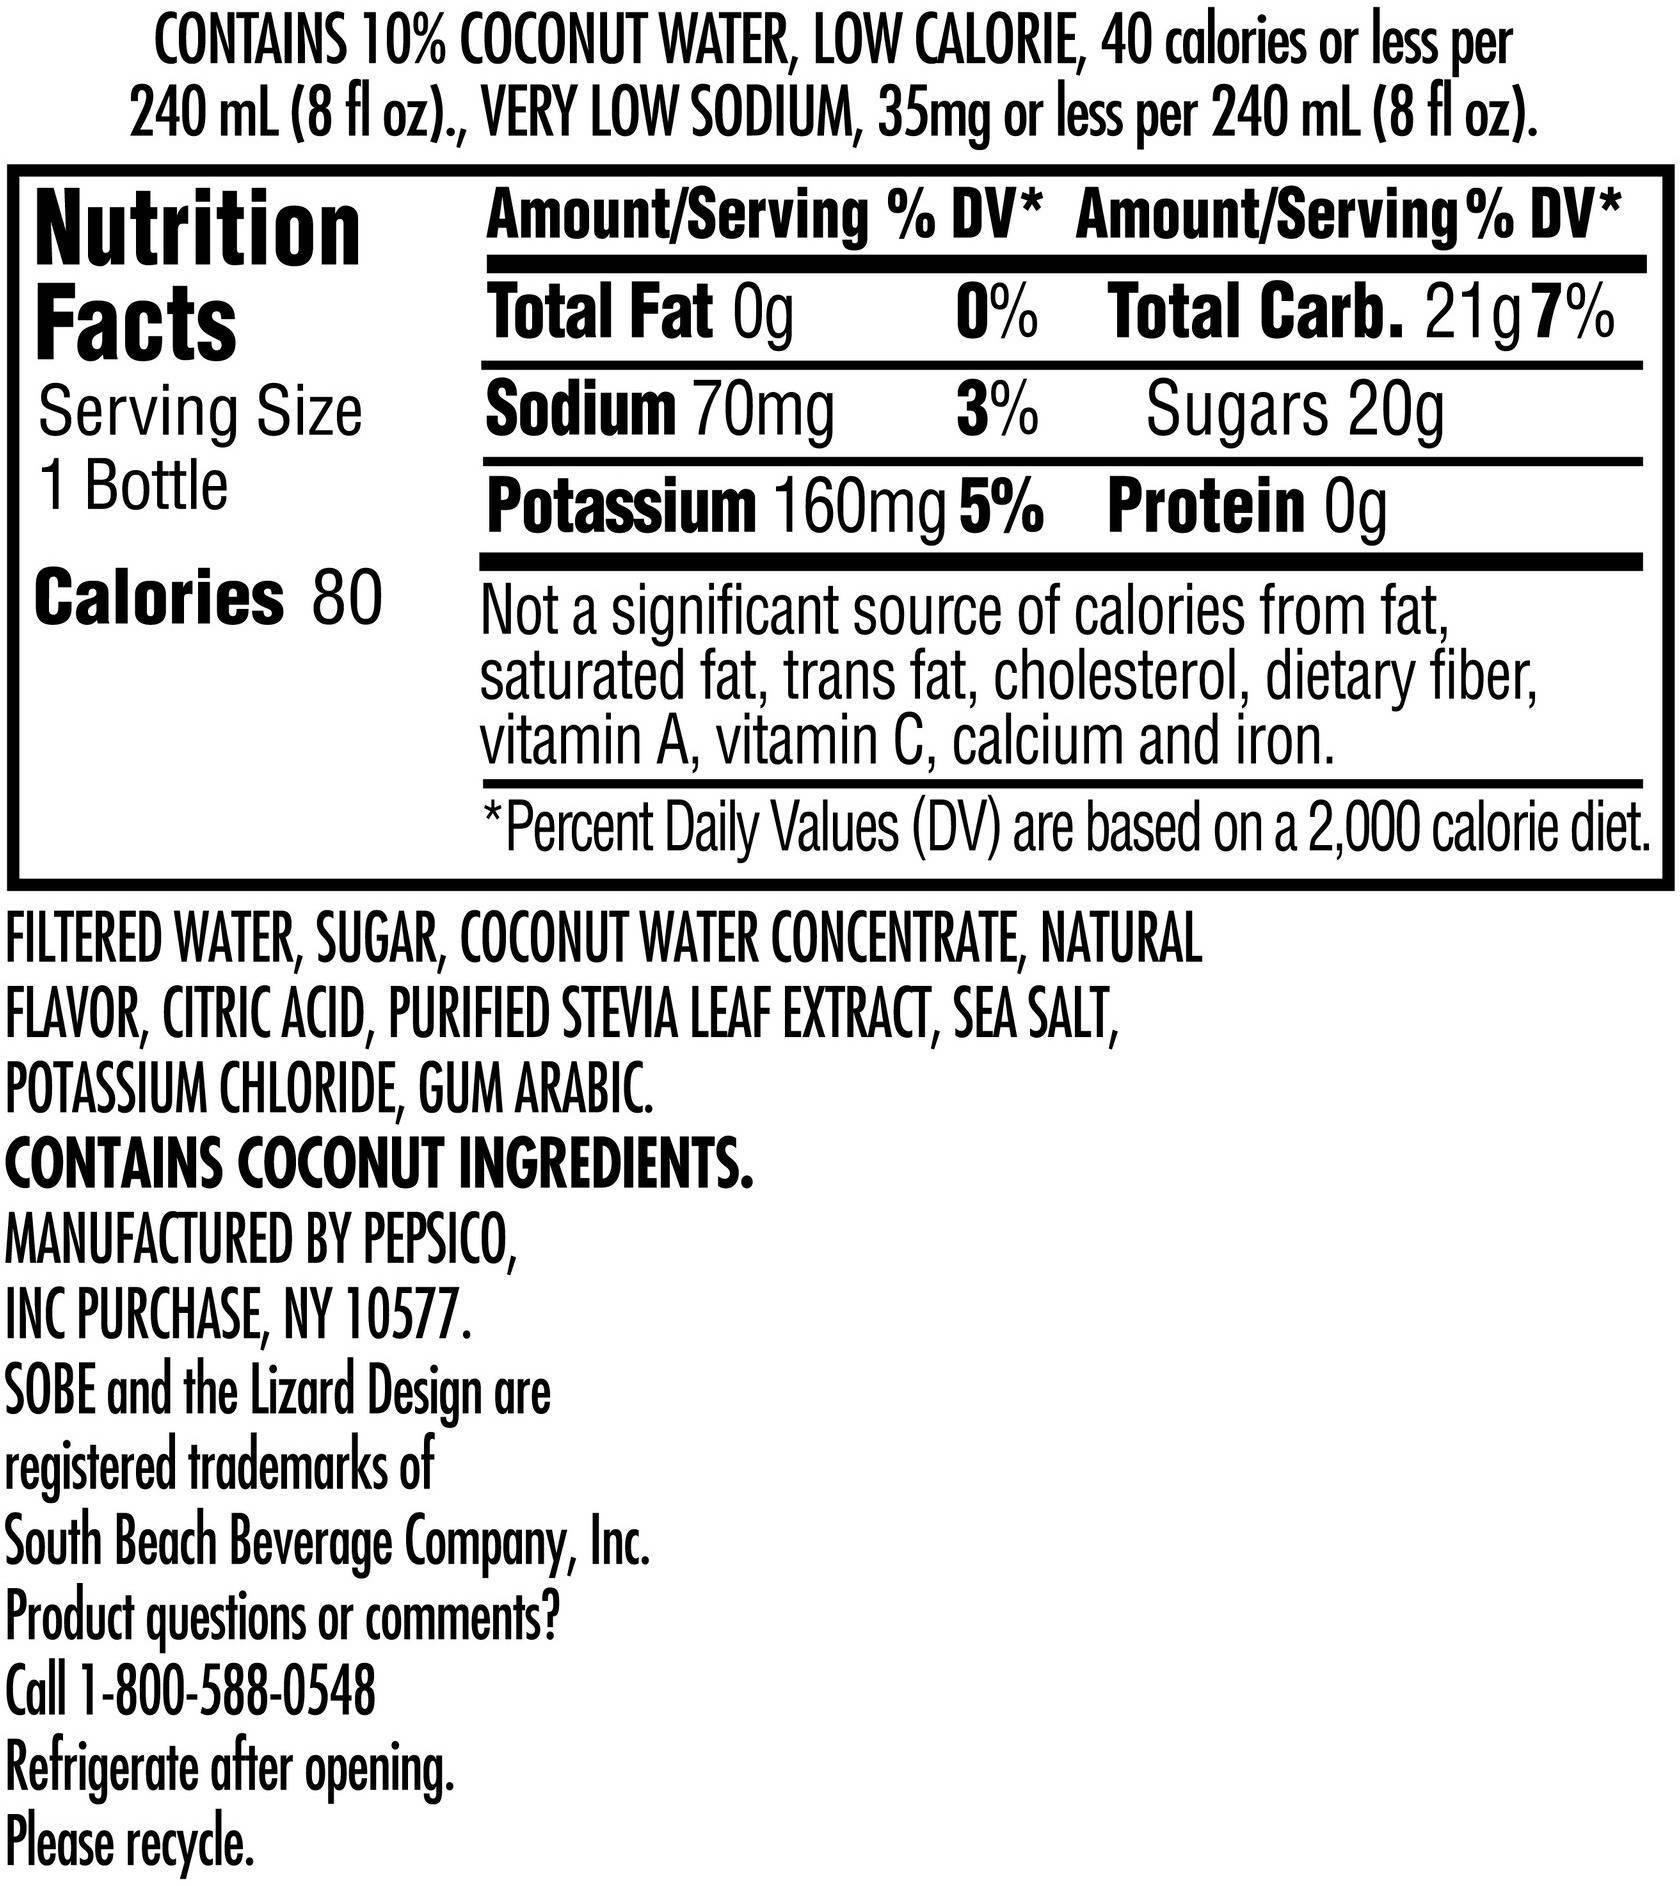 Image describing nutrition information for product SoBeWater Pacific Coconut